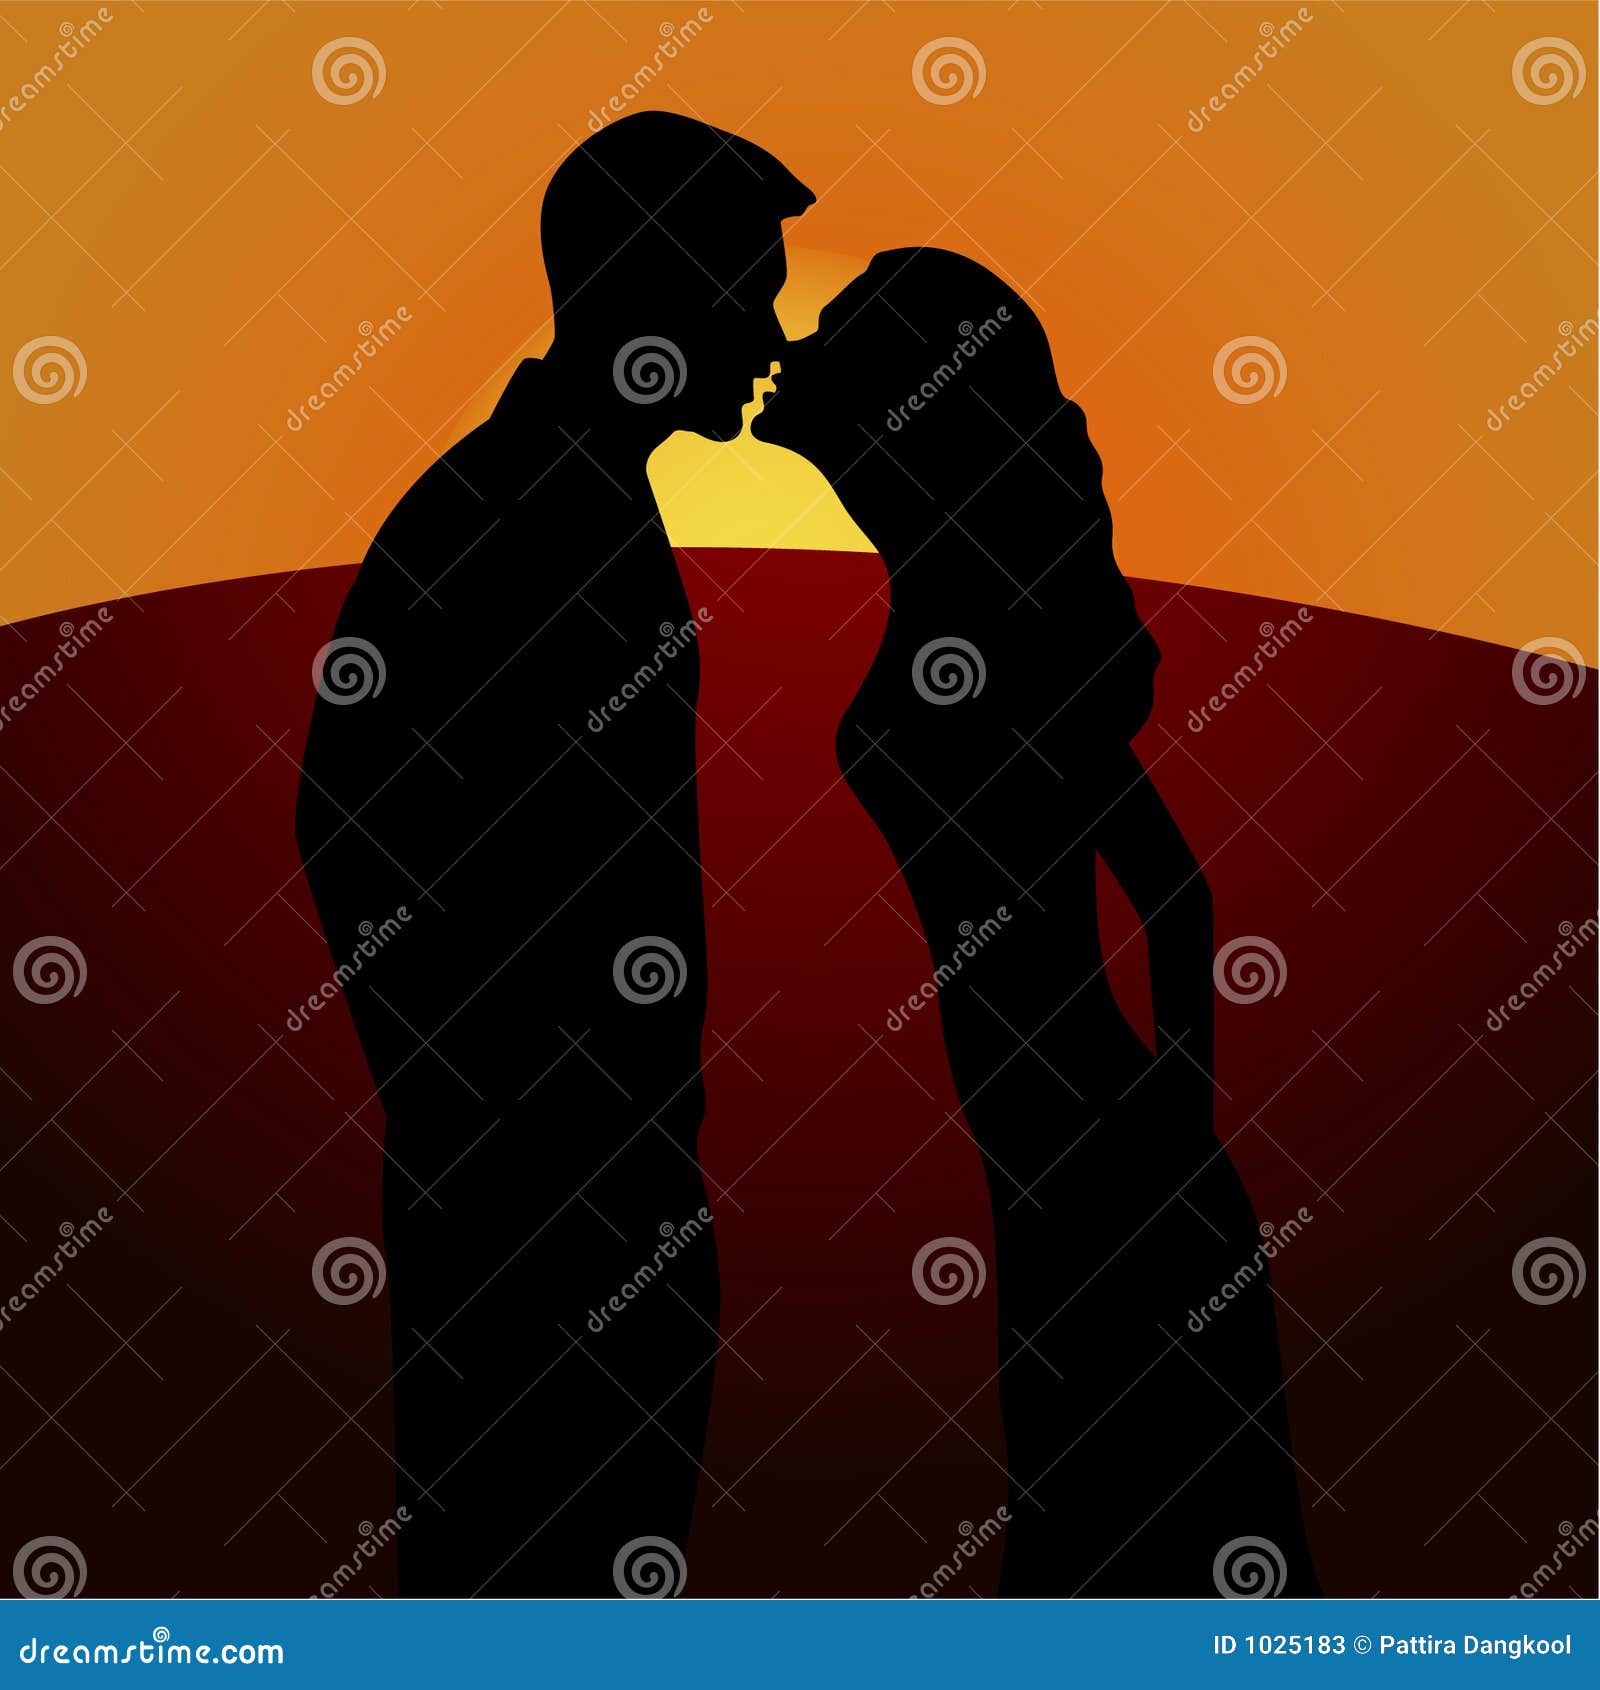 Download this Romance Kiss Romantic Sunset picture